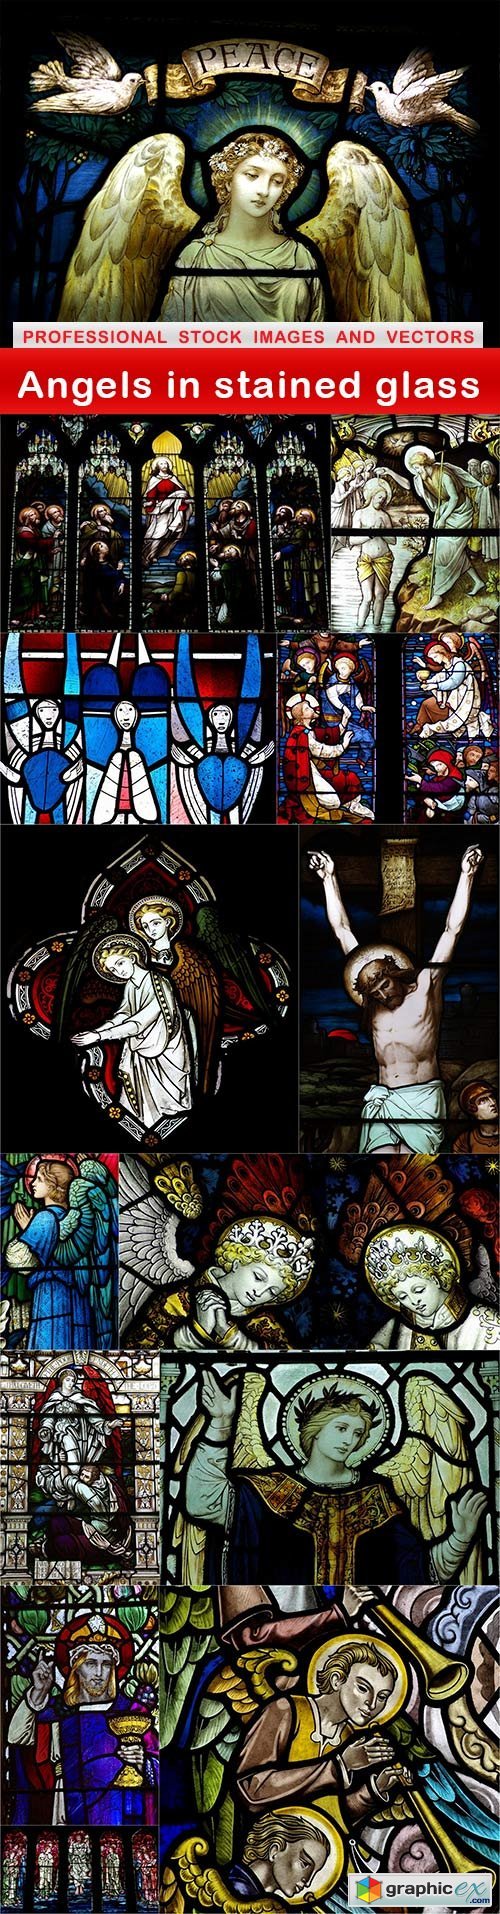 Angels in stained glass - 14 UHQ JPEG